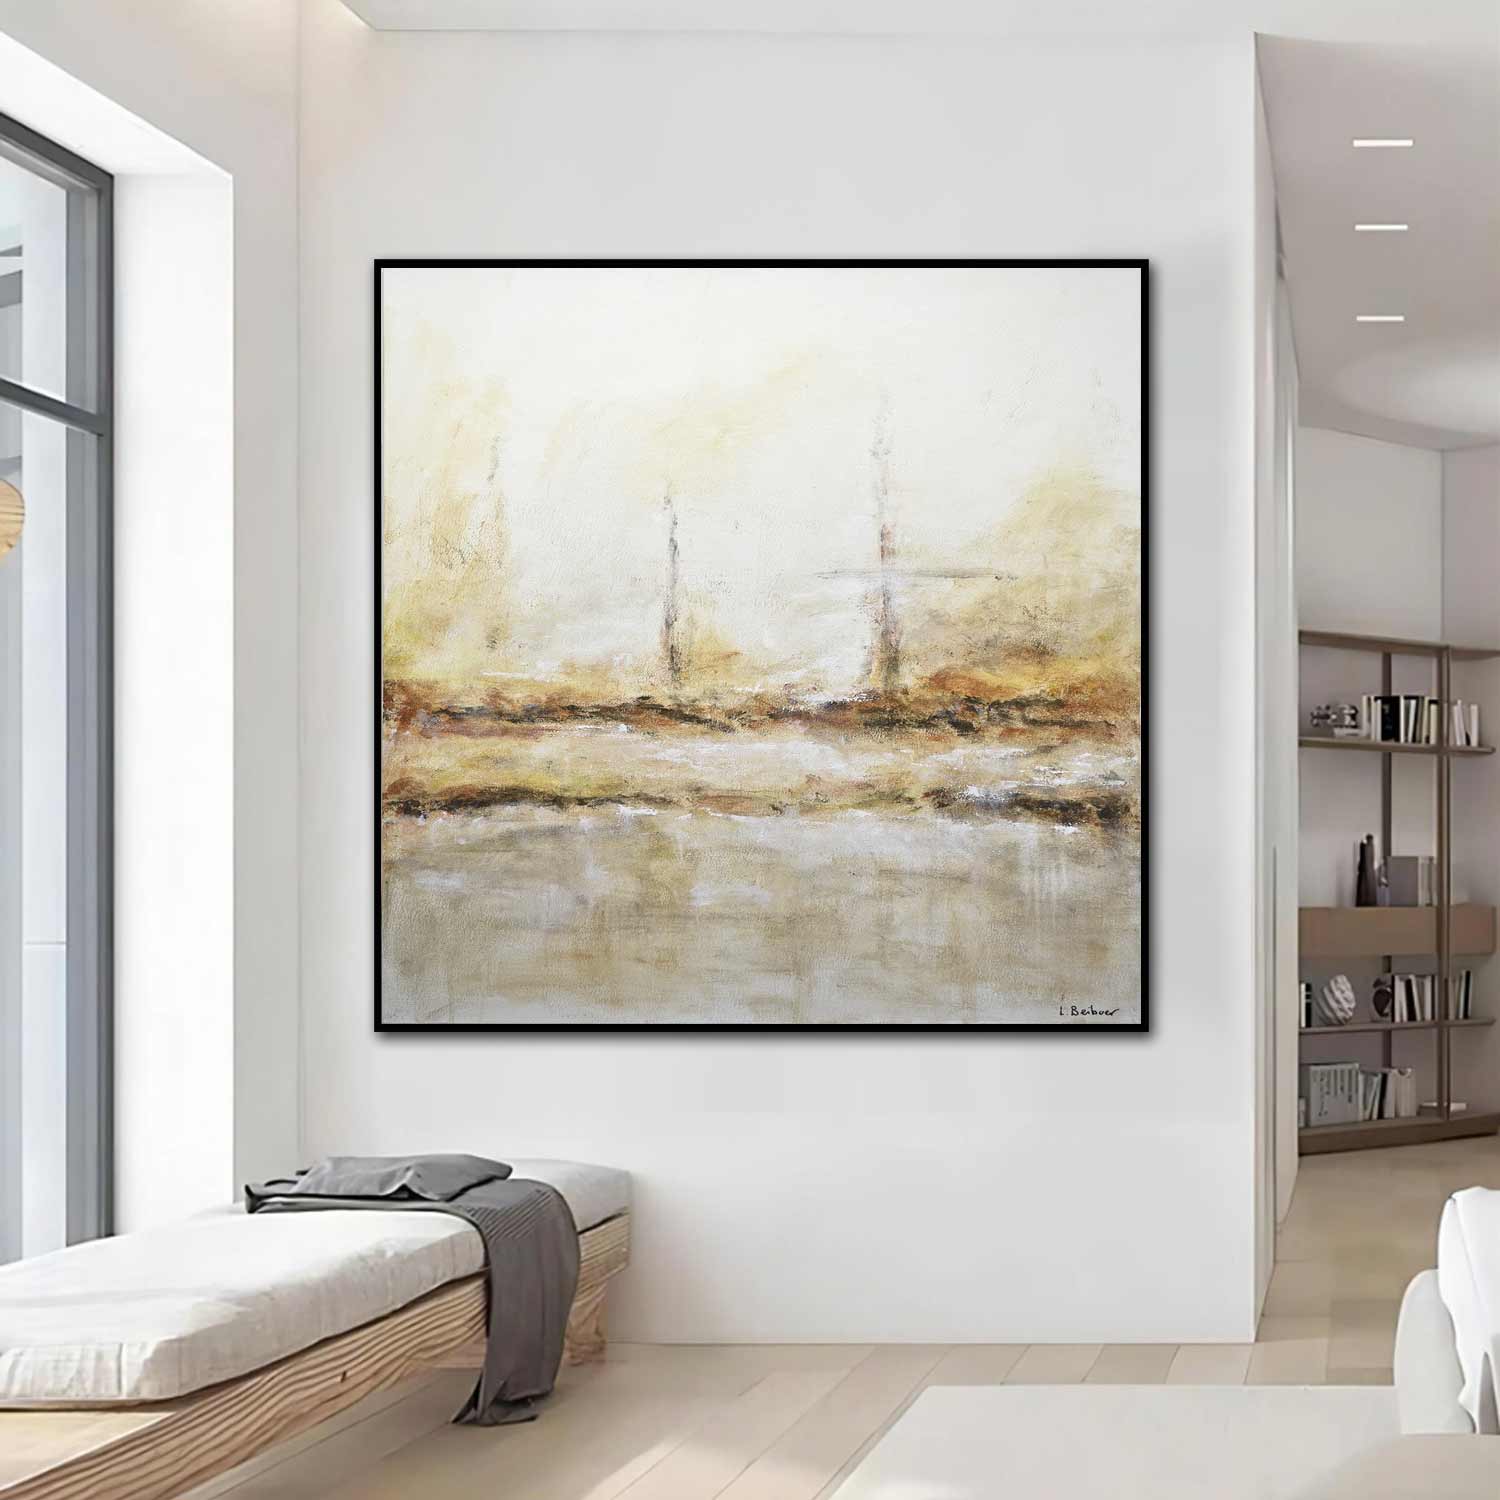 Light Abstract Wall Art Painting Natural Colors "Taken"